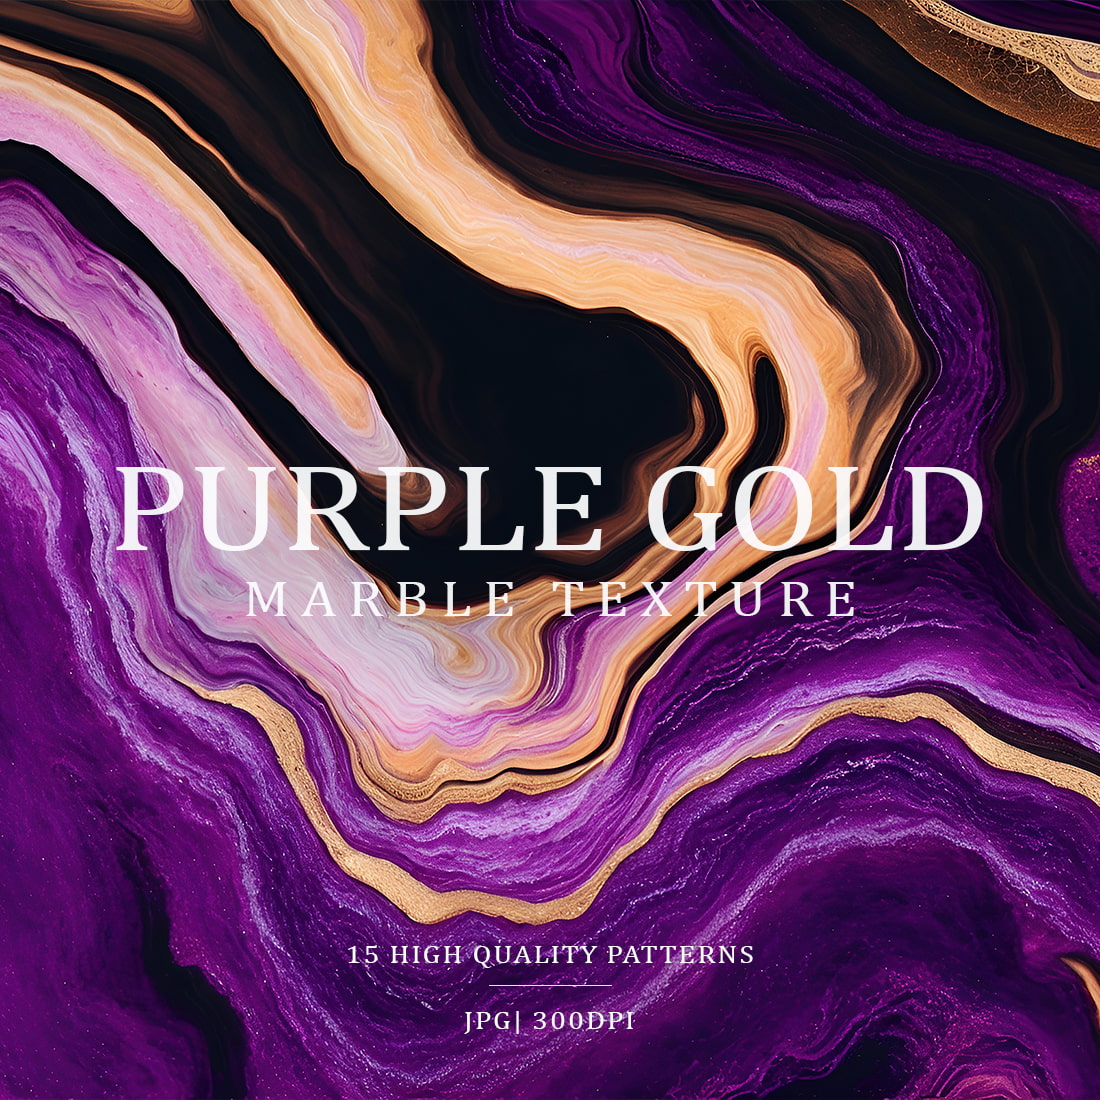 Purple Gold Marble Textures cover image.